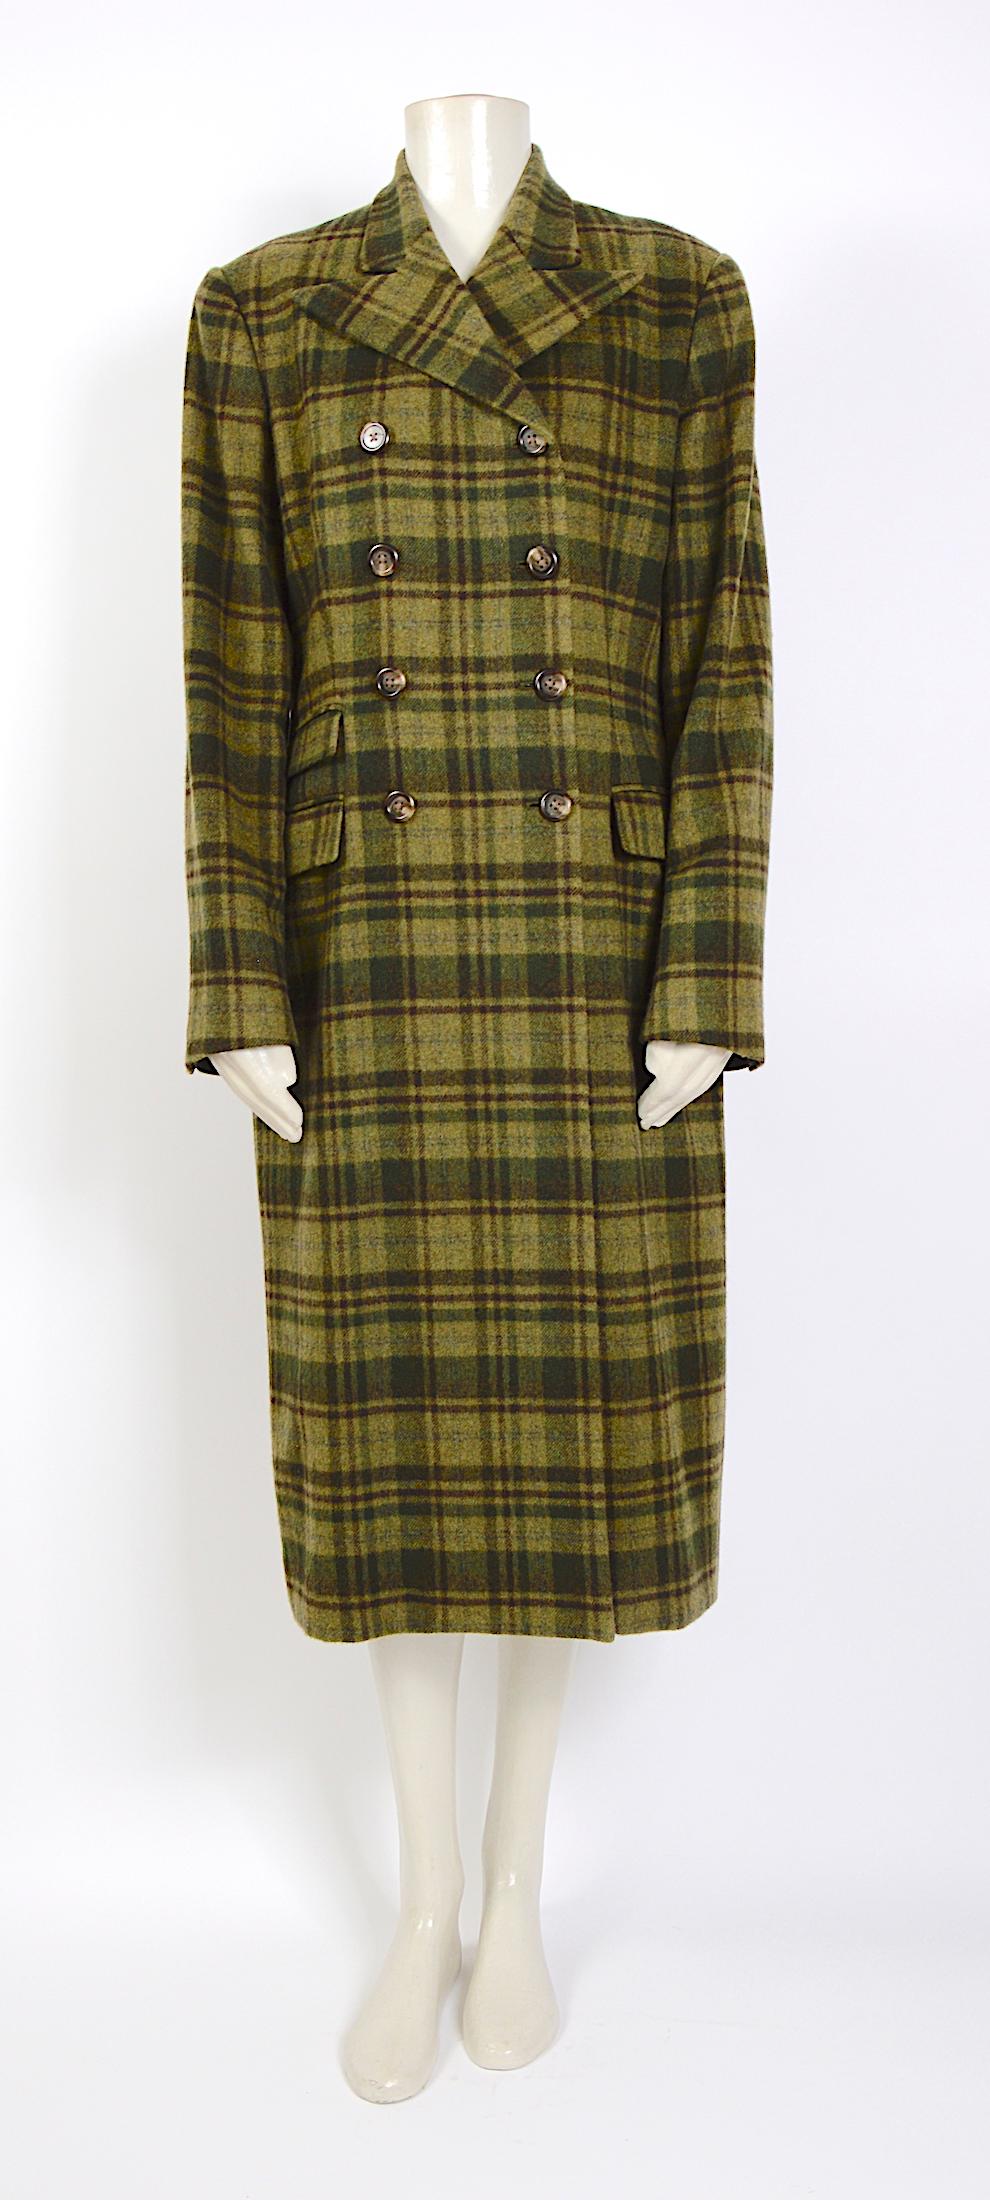 Vintage Ralph Lauren Collections green tartan plaid made in 100% cashmere signed satin lining coat.
Made in the USA - Size 14
Measurements taken flat: Sh to Sh 17inch/43cm - Ua to Ua 21inch/53cm(x2) - Waist 19inch/48cm(x2) - Hip 23inch/59cm(x2) -